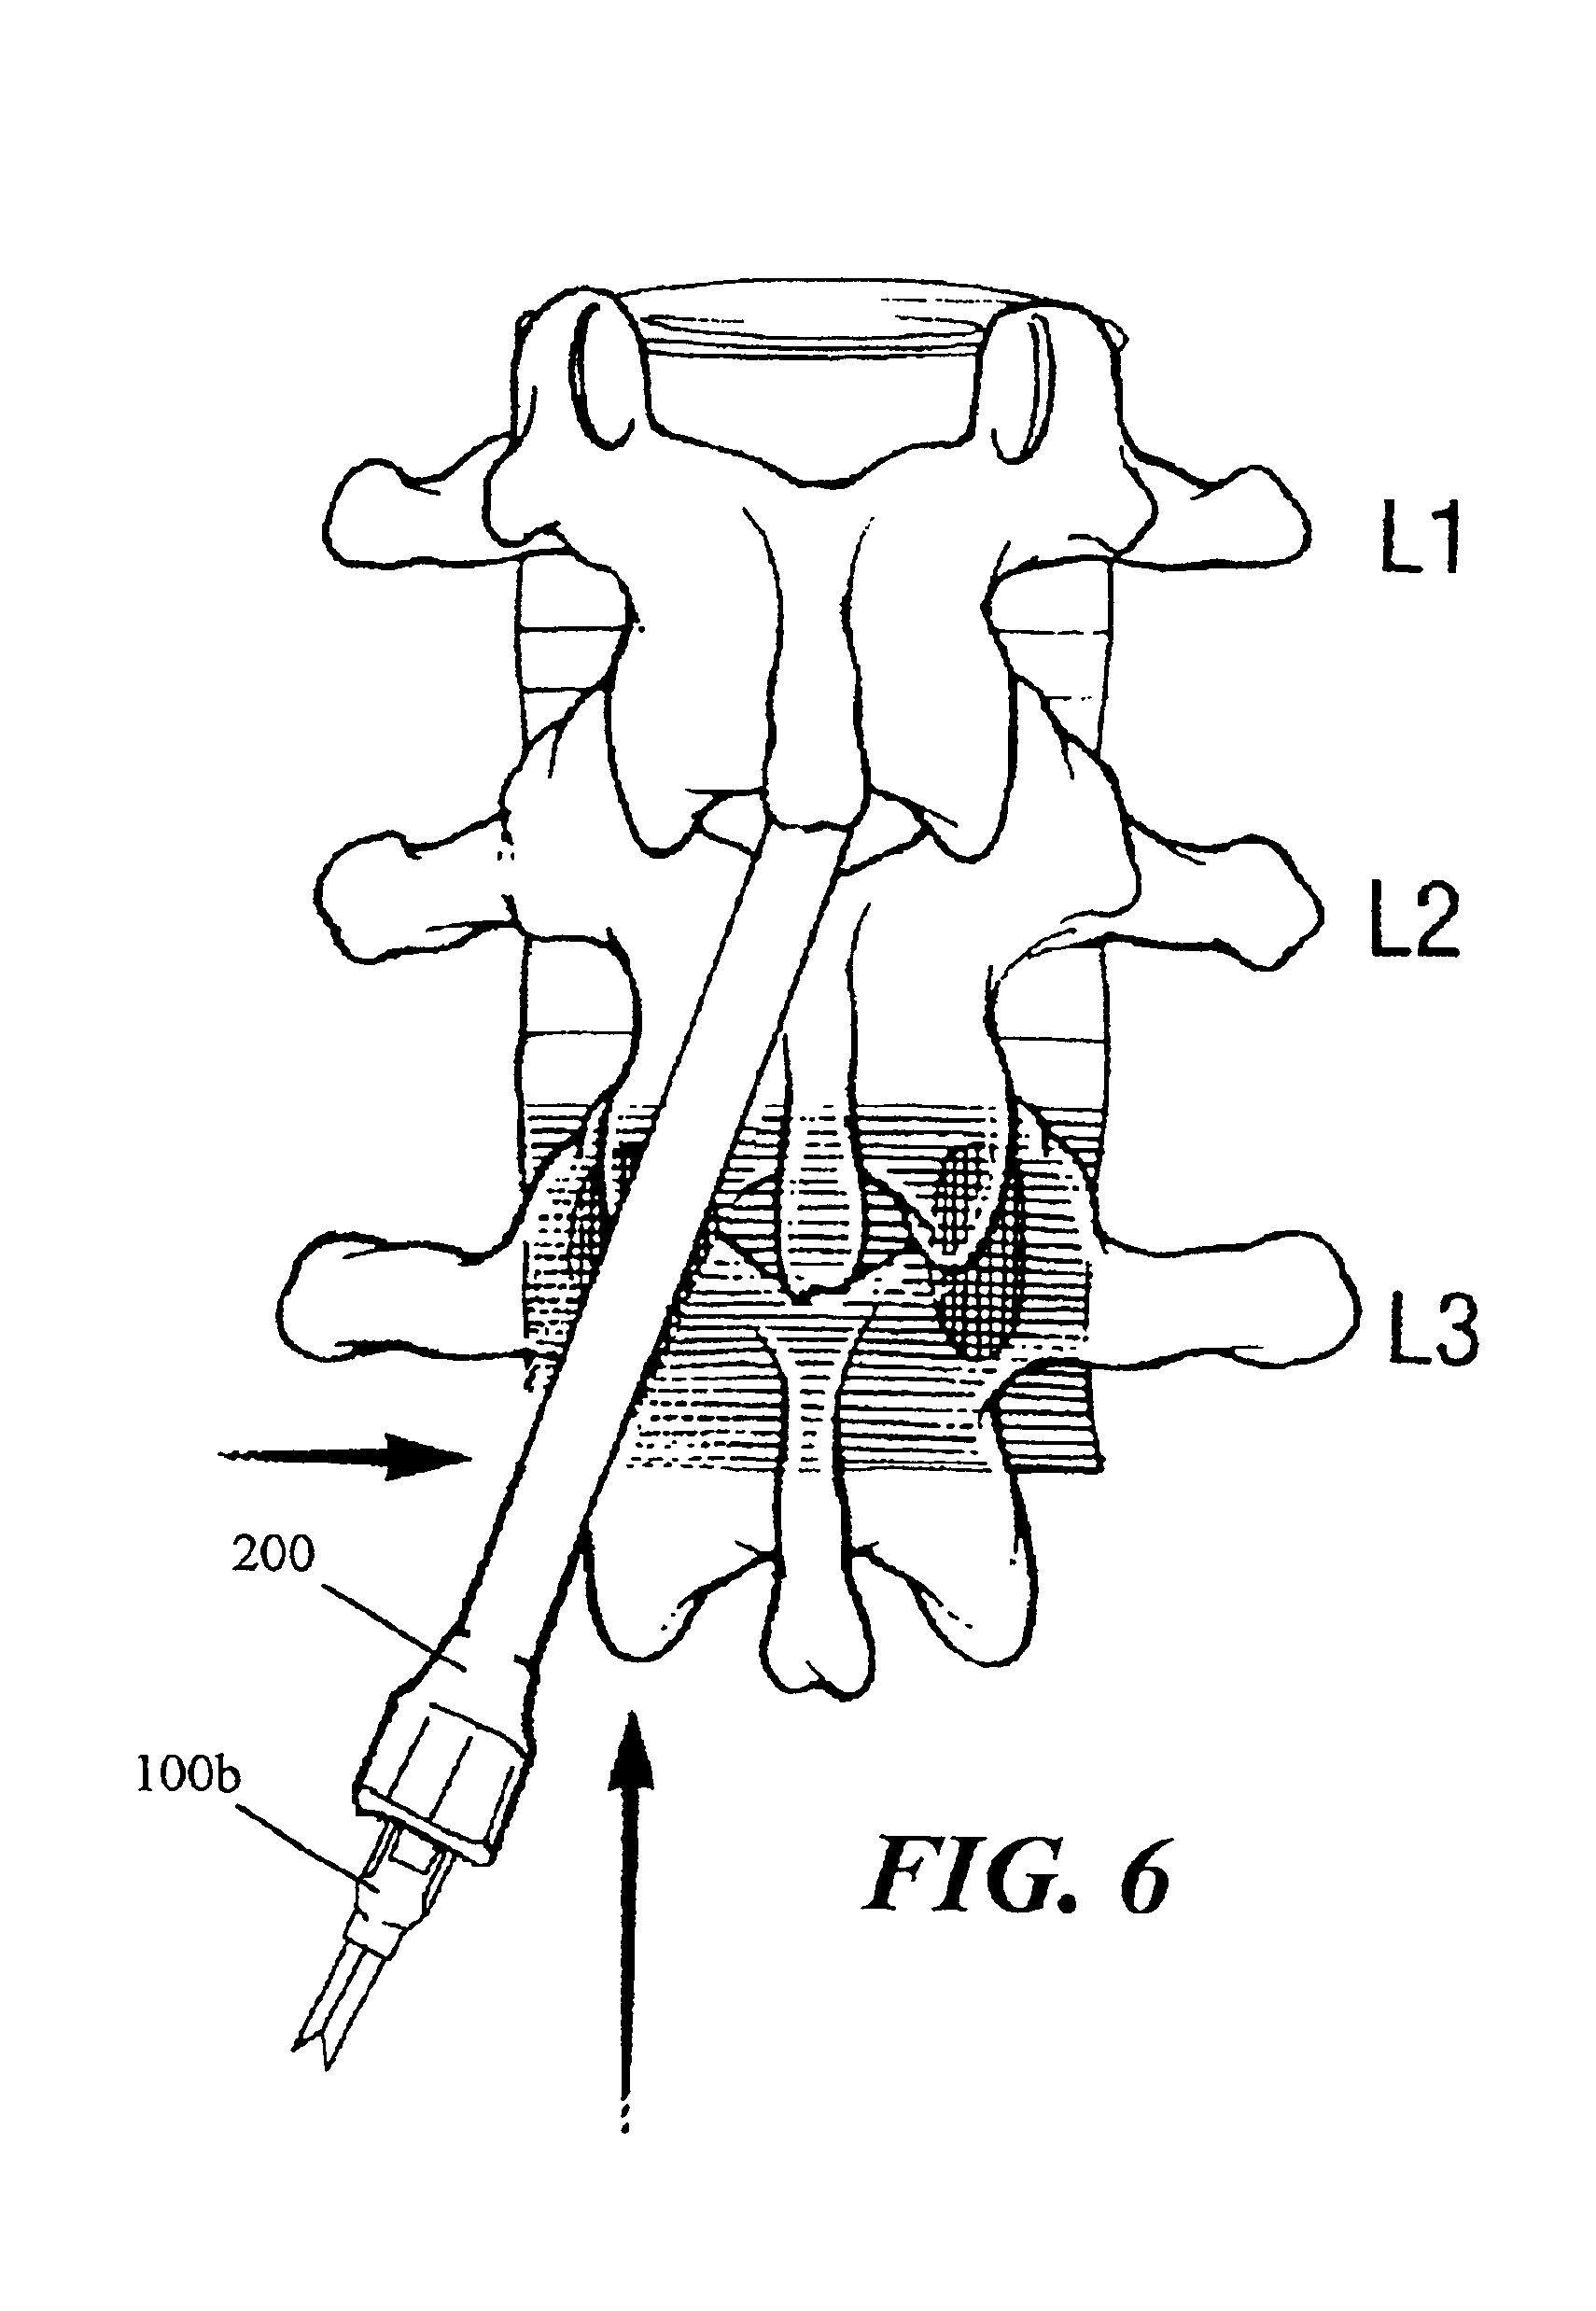 Stimulation/sensing lead adapted for percutaneous insertion